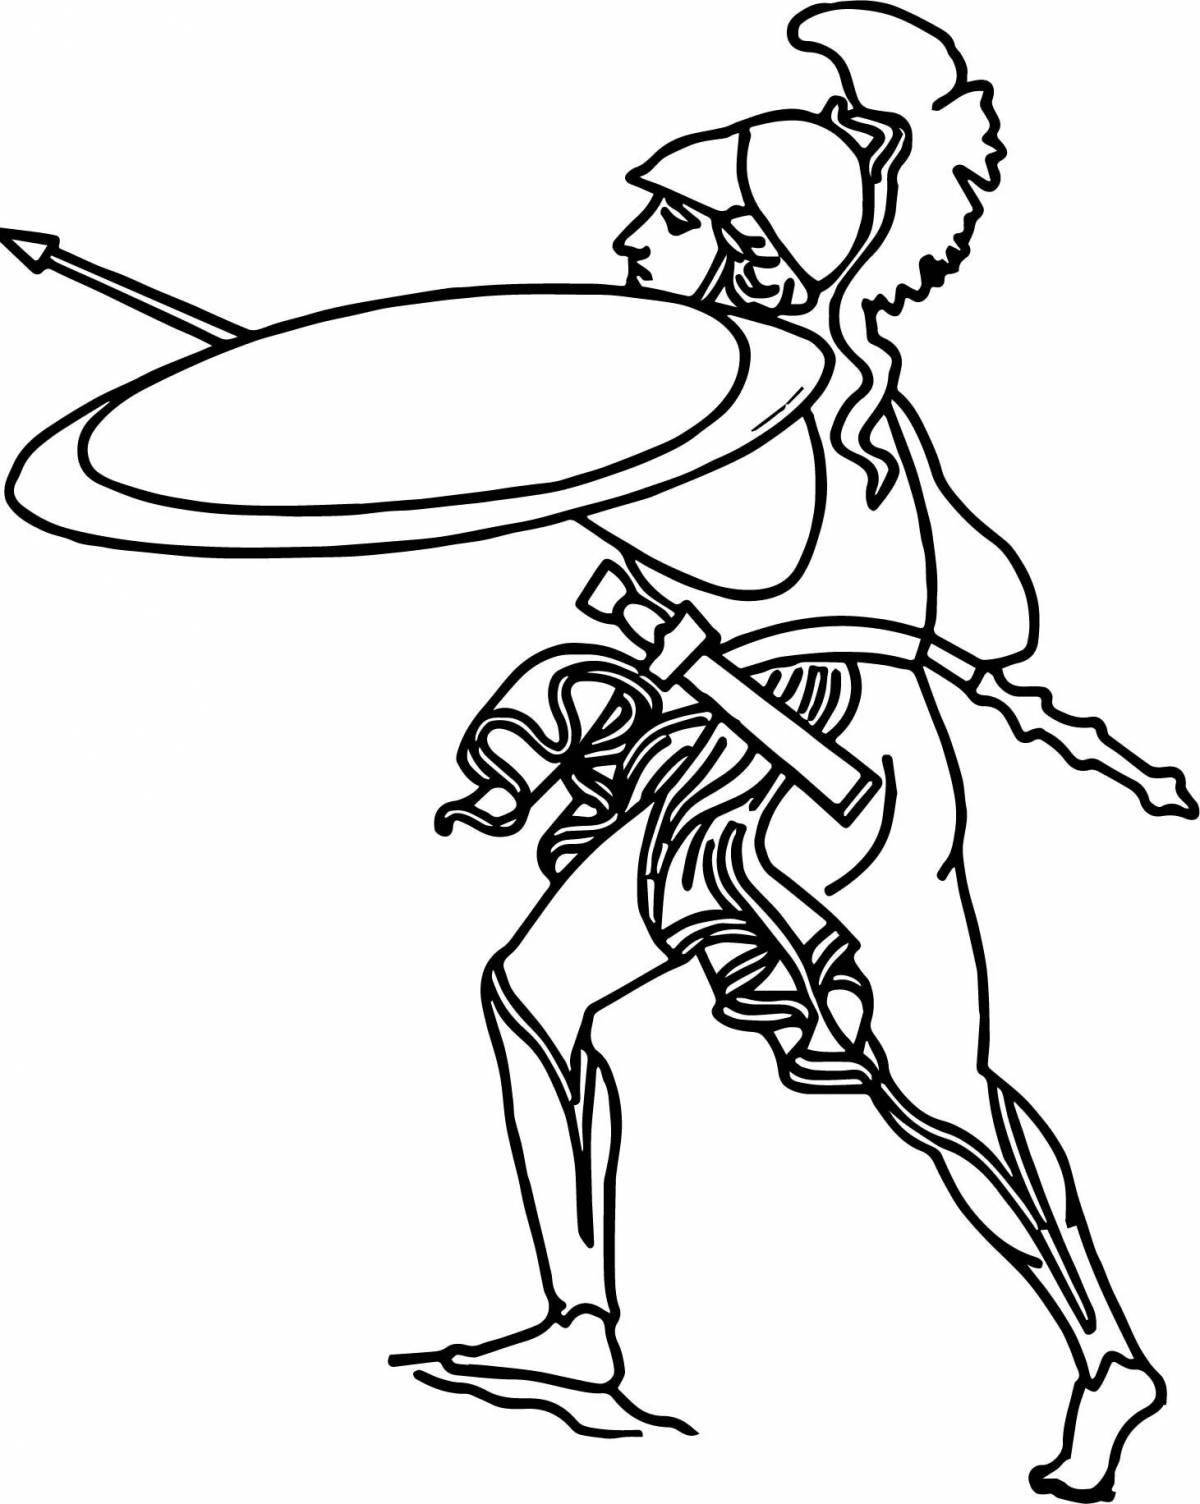 Grand Gladiator coloring page